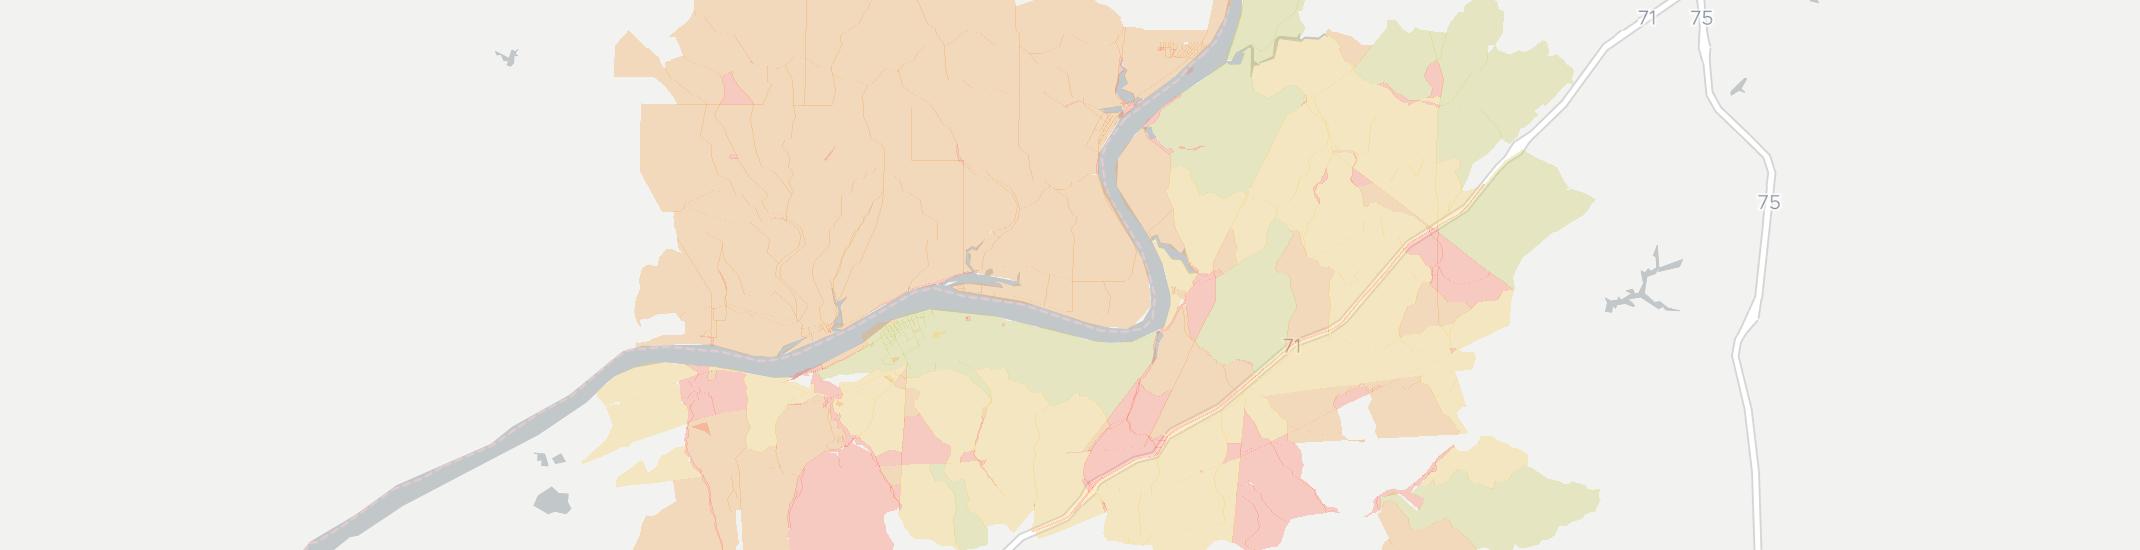 Warsaw Internet Competition Map. Click for interactive map.